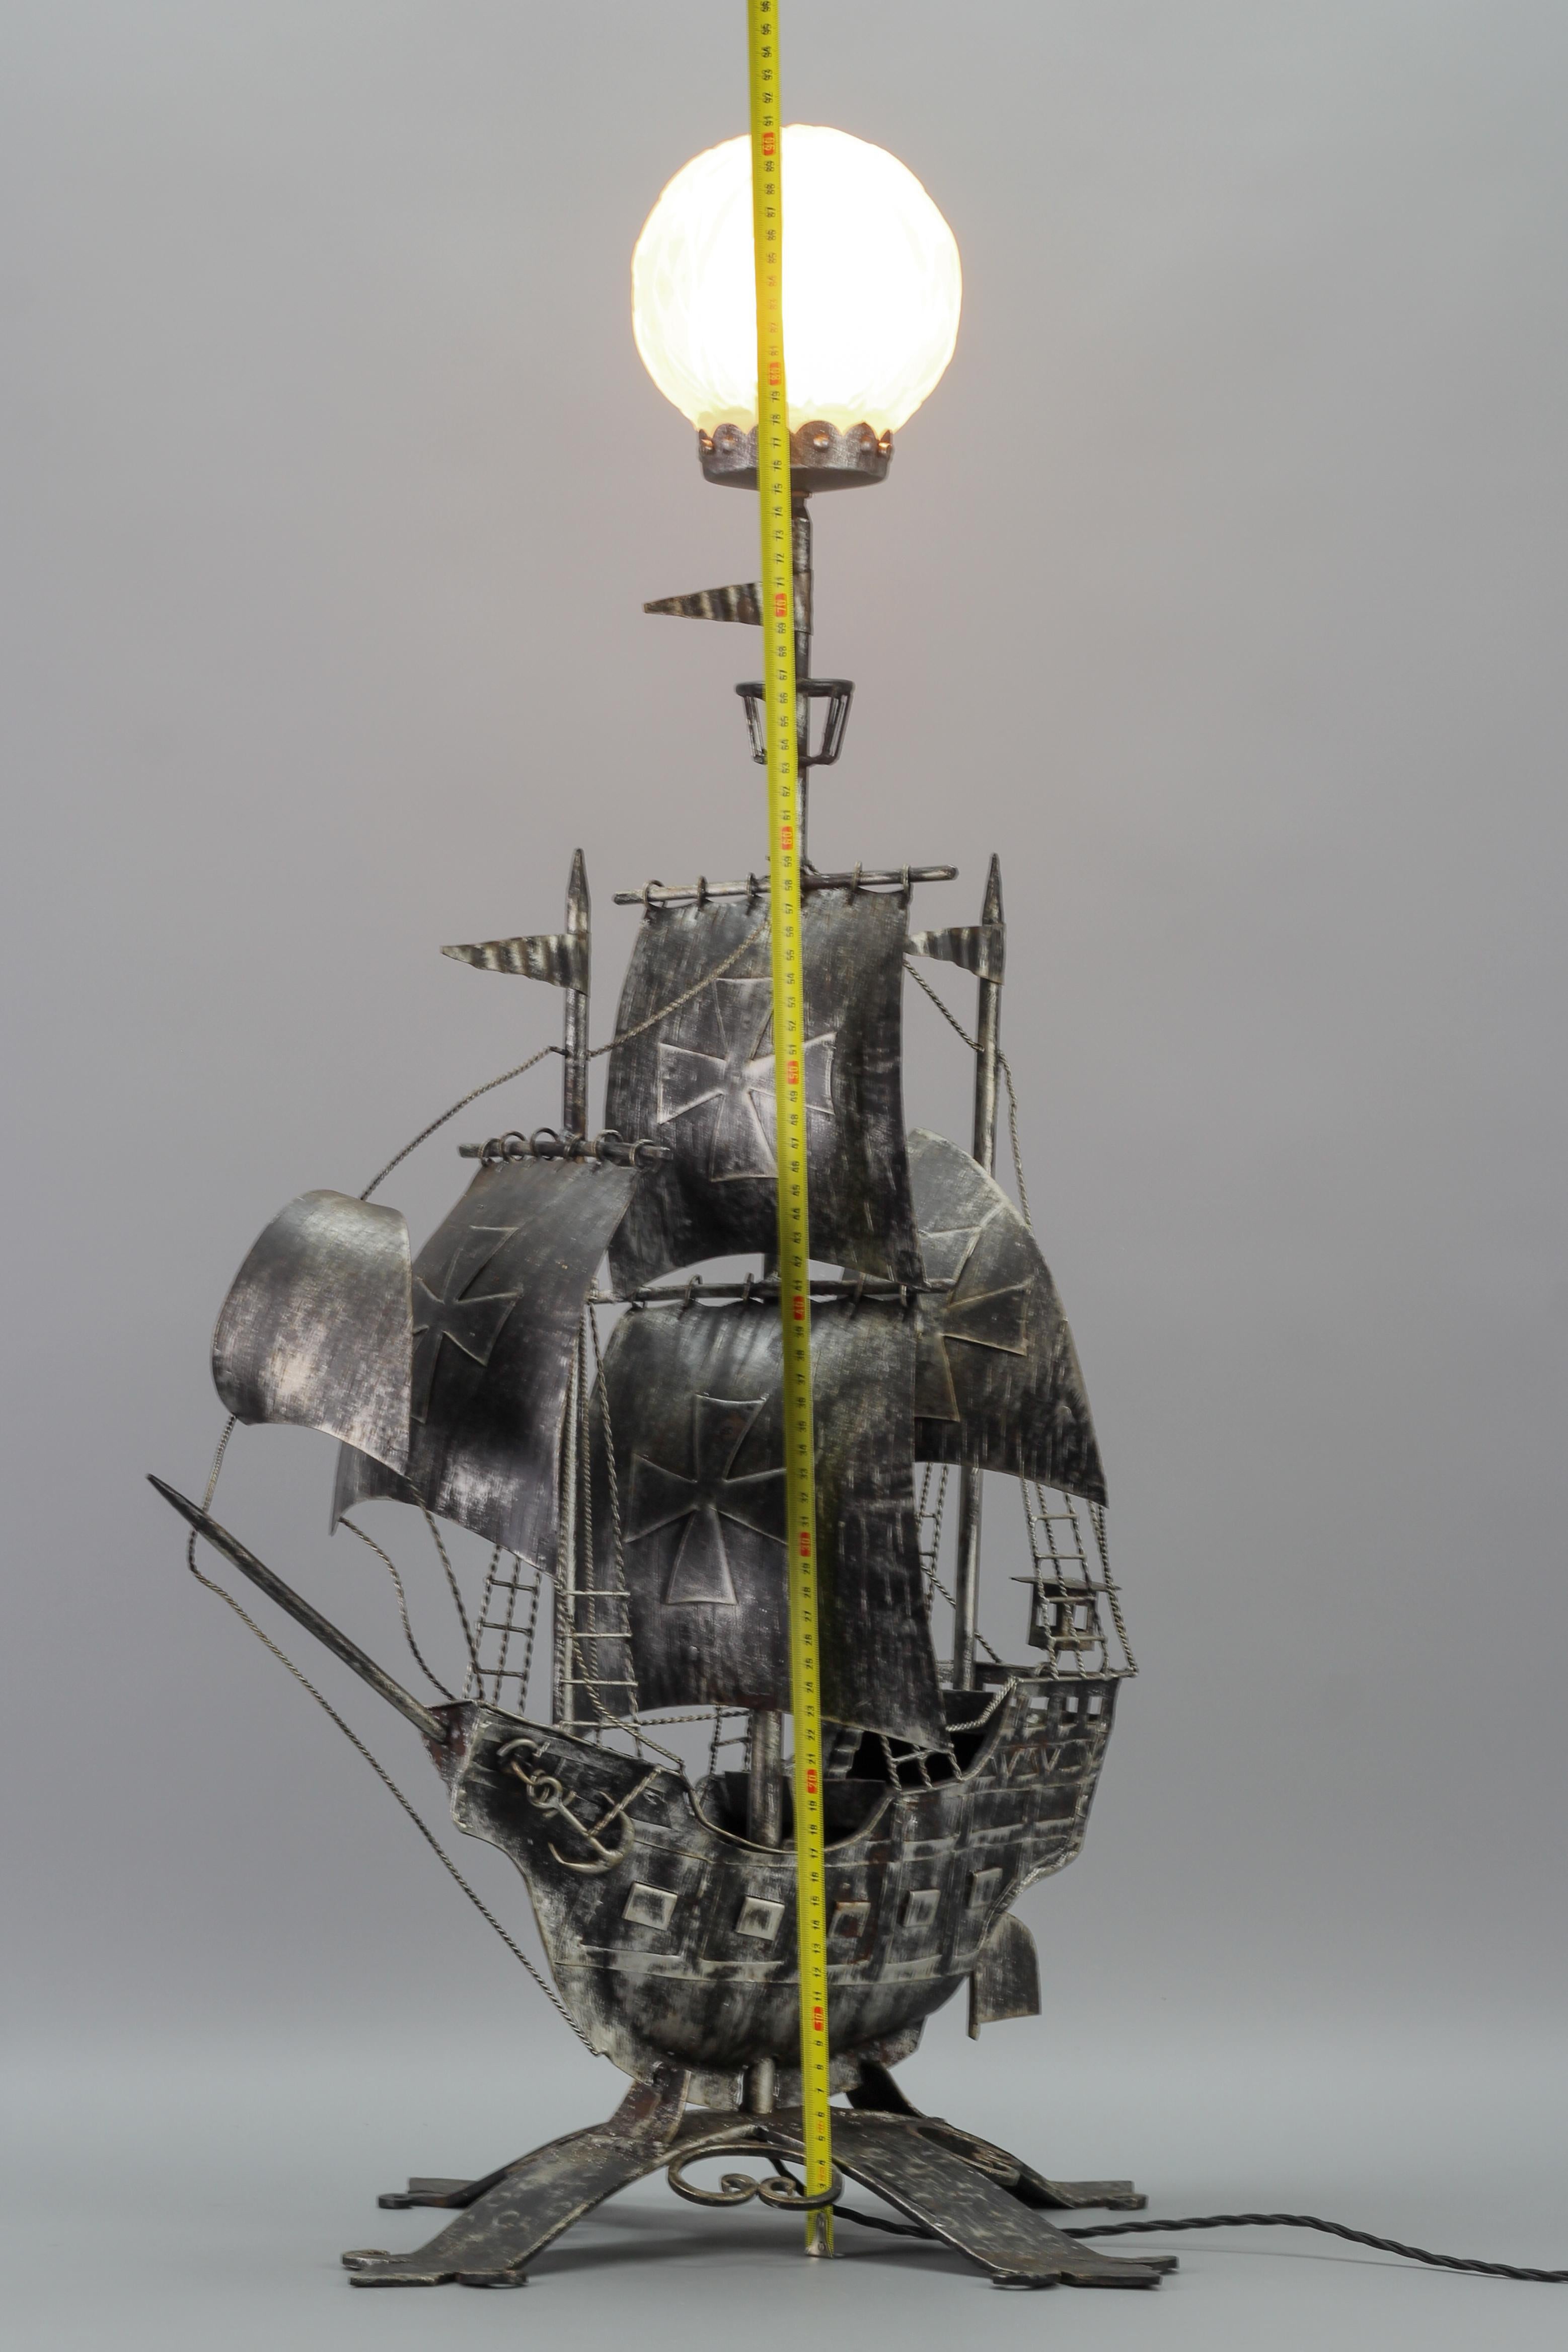 Wrought Iron and Glass Spanish Galleon Sailing Ship Shaped Floor Lamp, 1950s For Sale 12